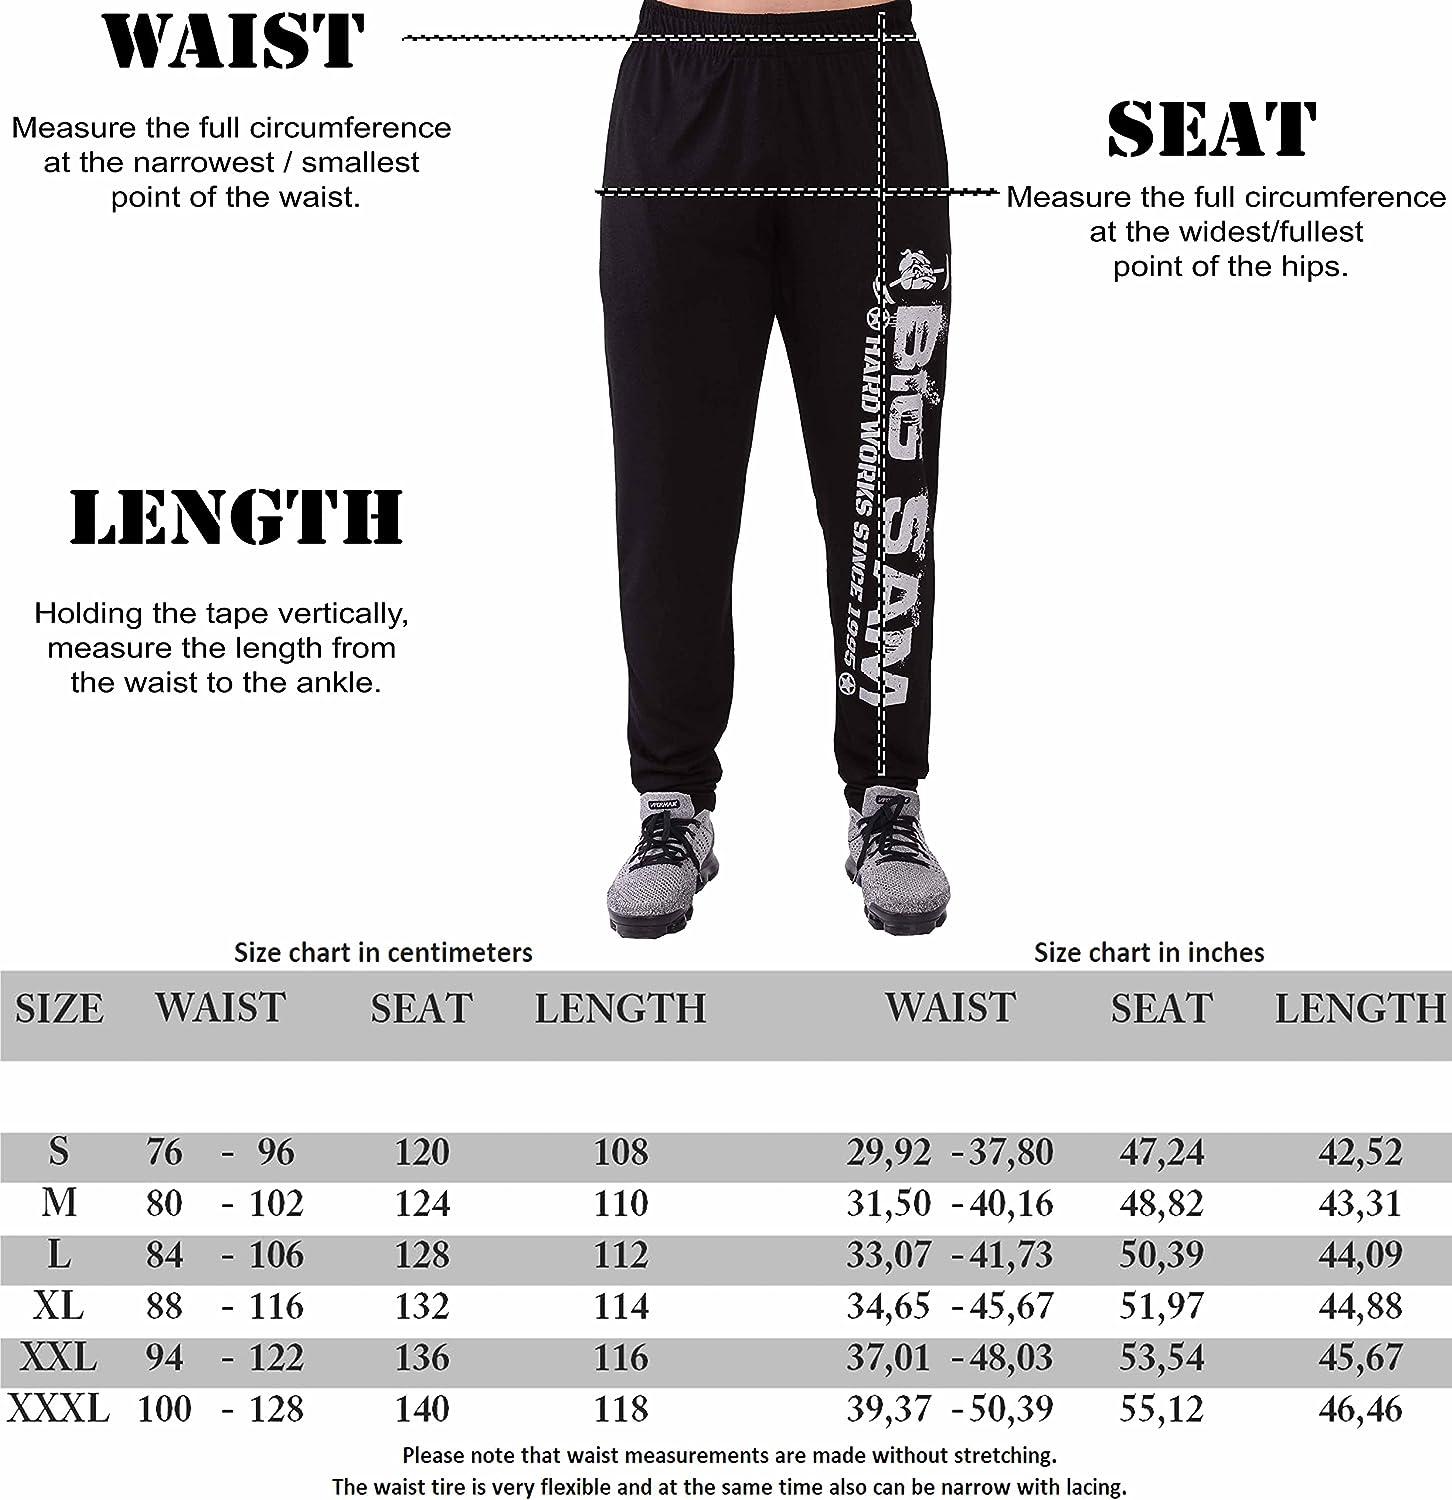 Men's Loose Fit Sweatpants, Flowing Fabric, Flexible Gym Workout  Bodybuilding Active Pants with Pockets Large Light Brown